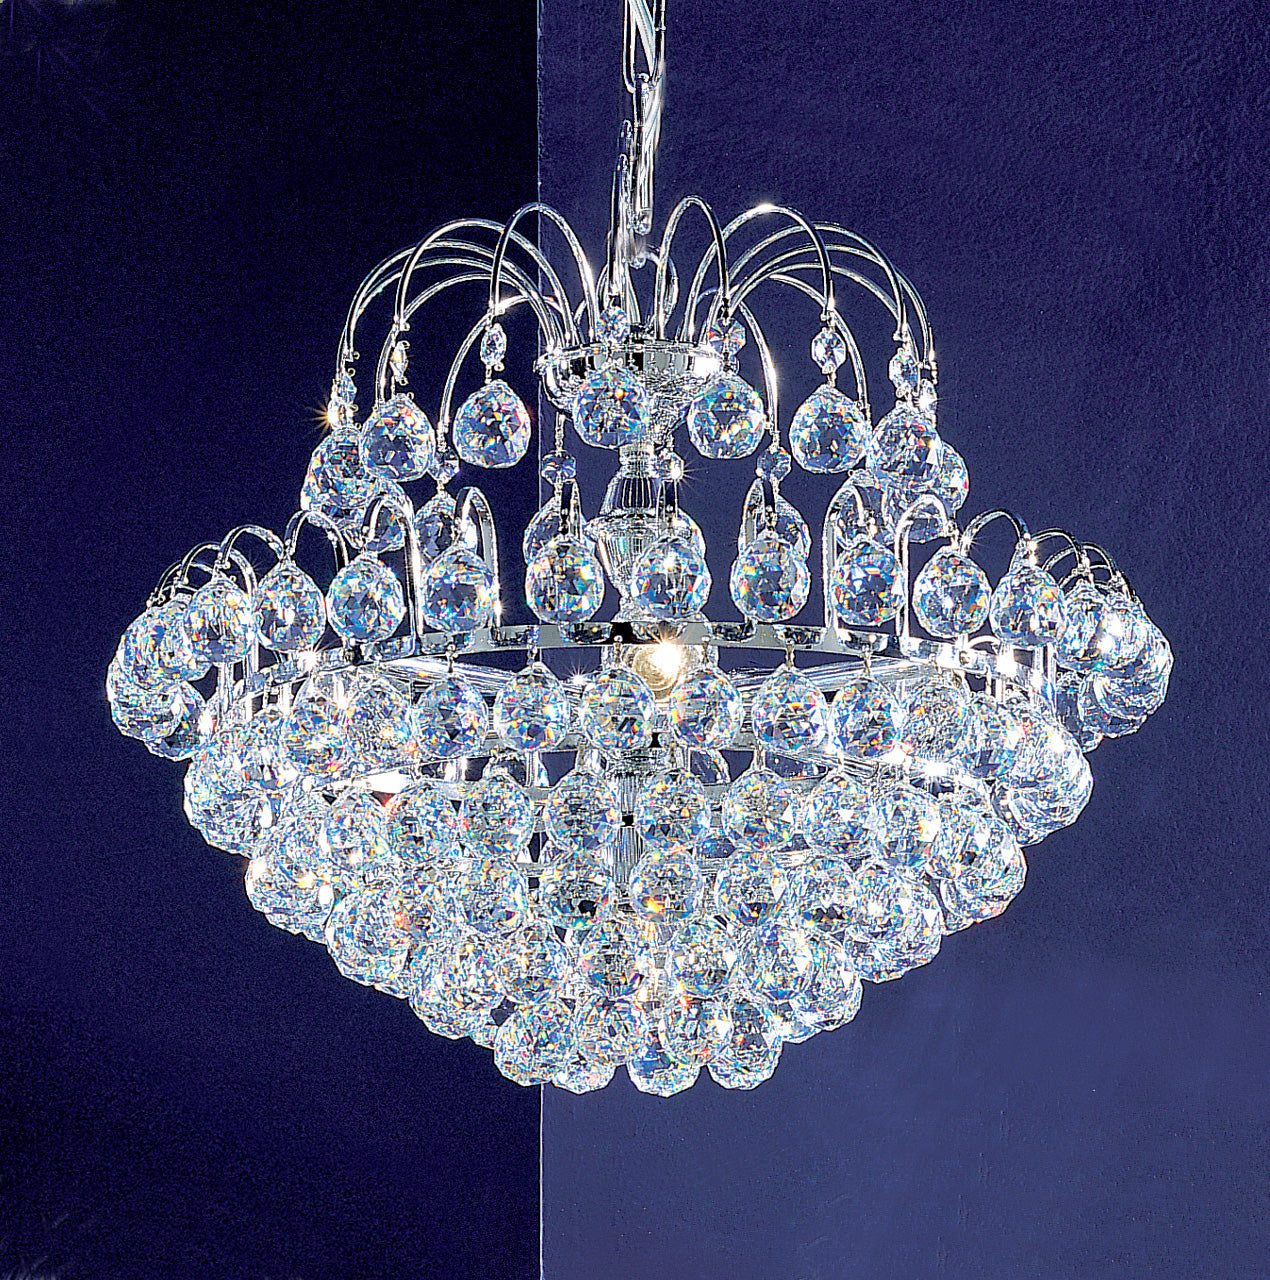 Classic Lighting 1895 CH CP Diamante Crystal Chandelier in Chrome (Imported from Spain)